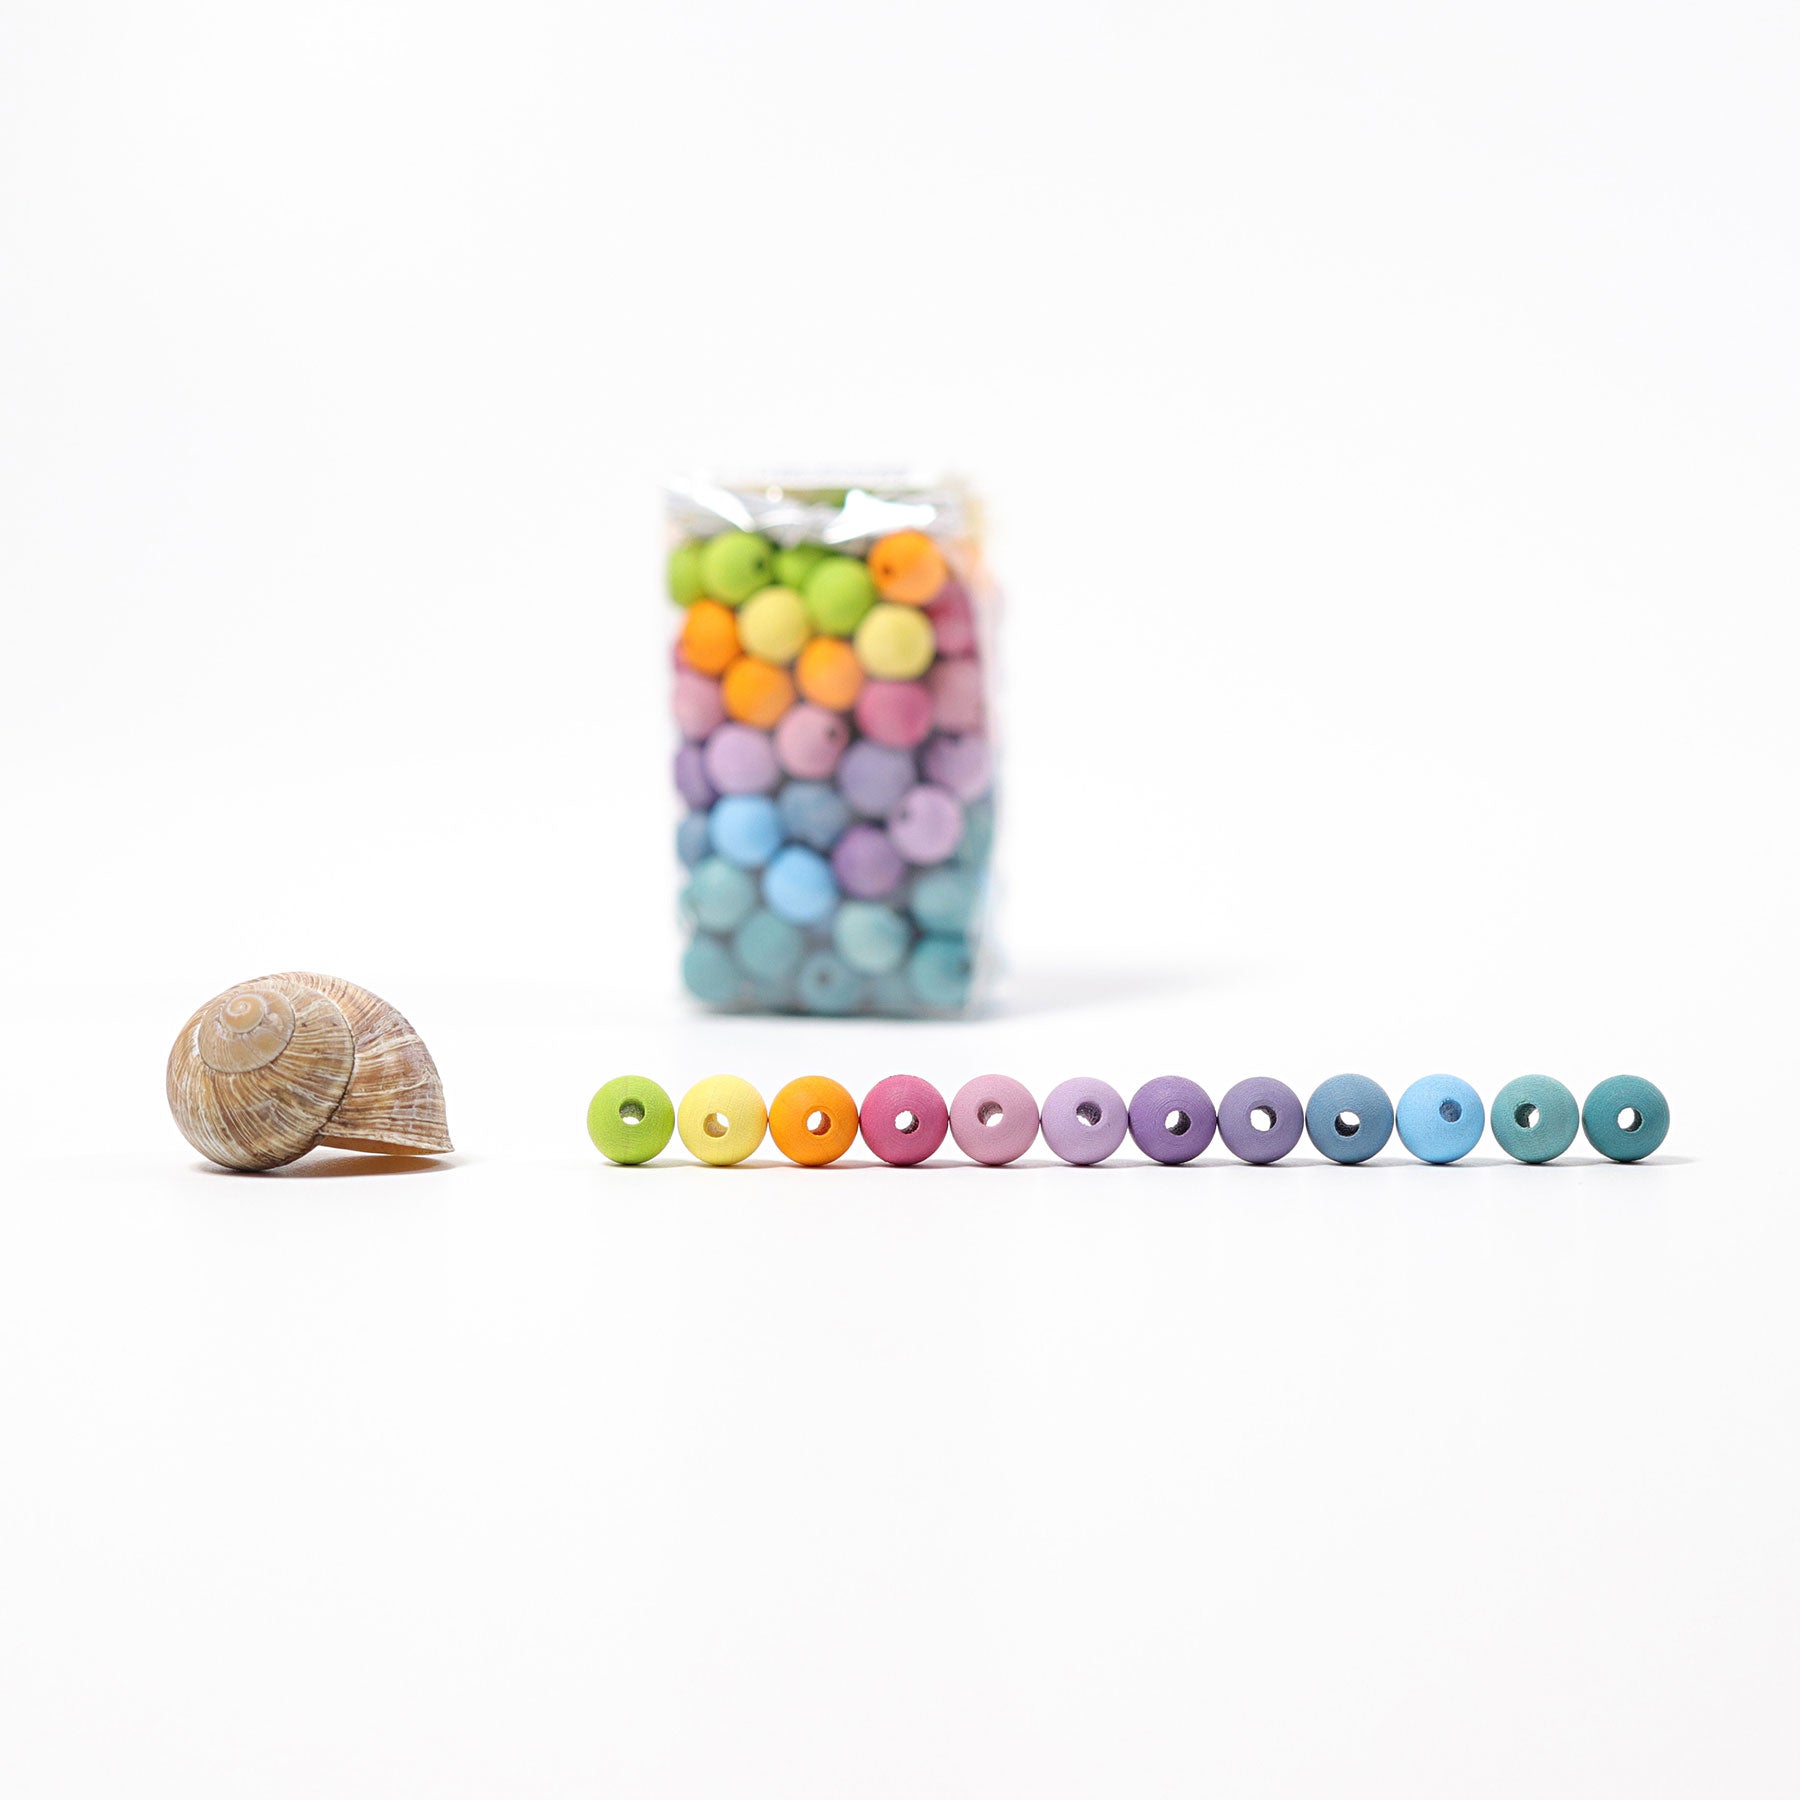 Grimm's Pastel Wooden Beads Small 12mm - 120 pieces – Elenfhant